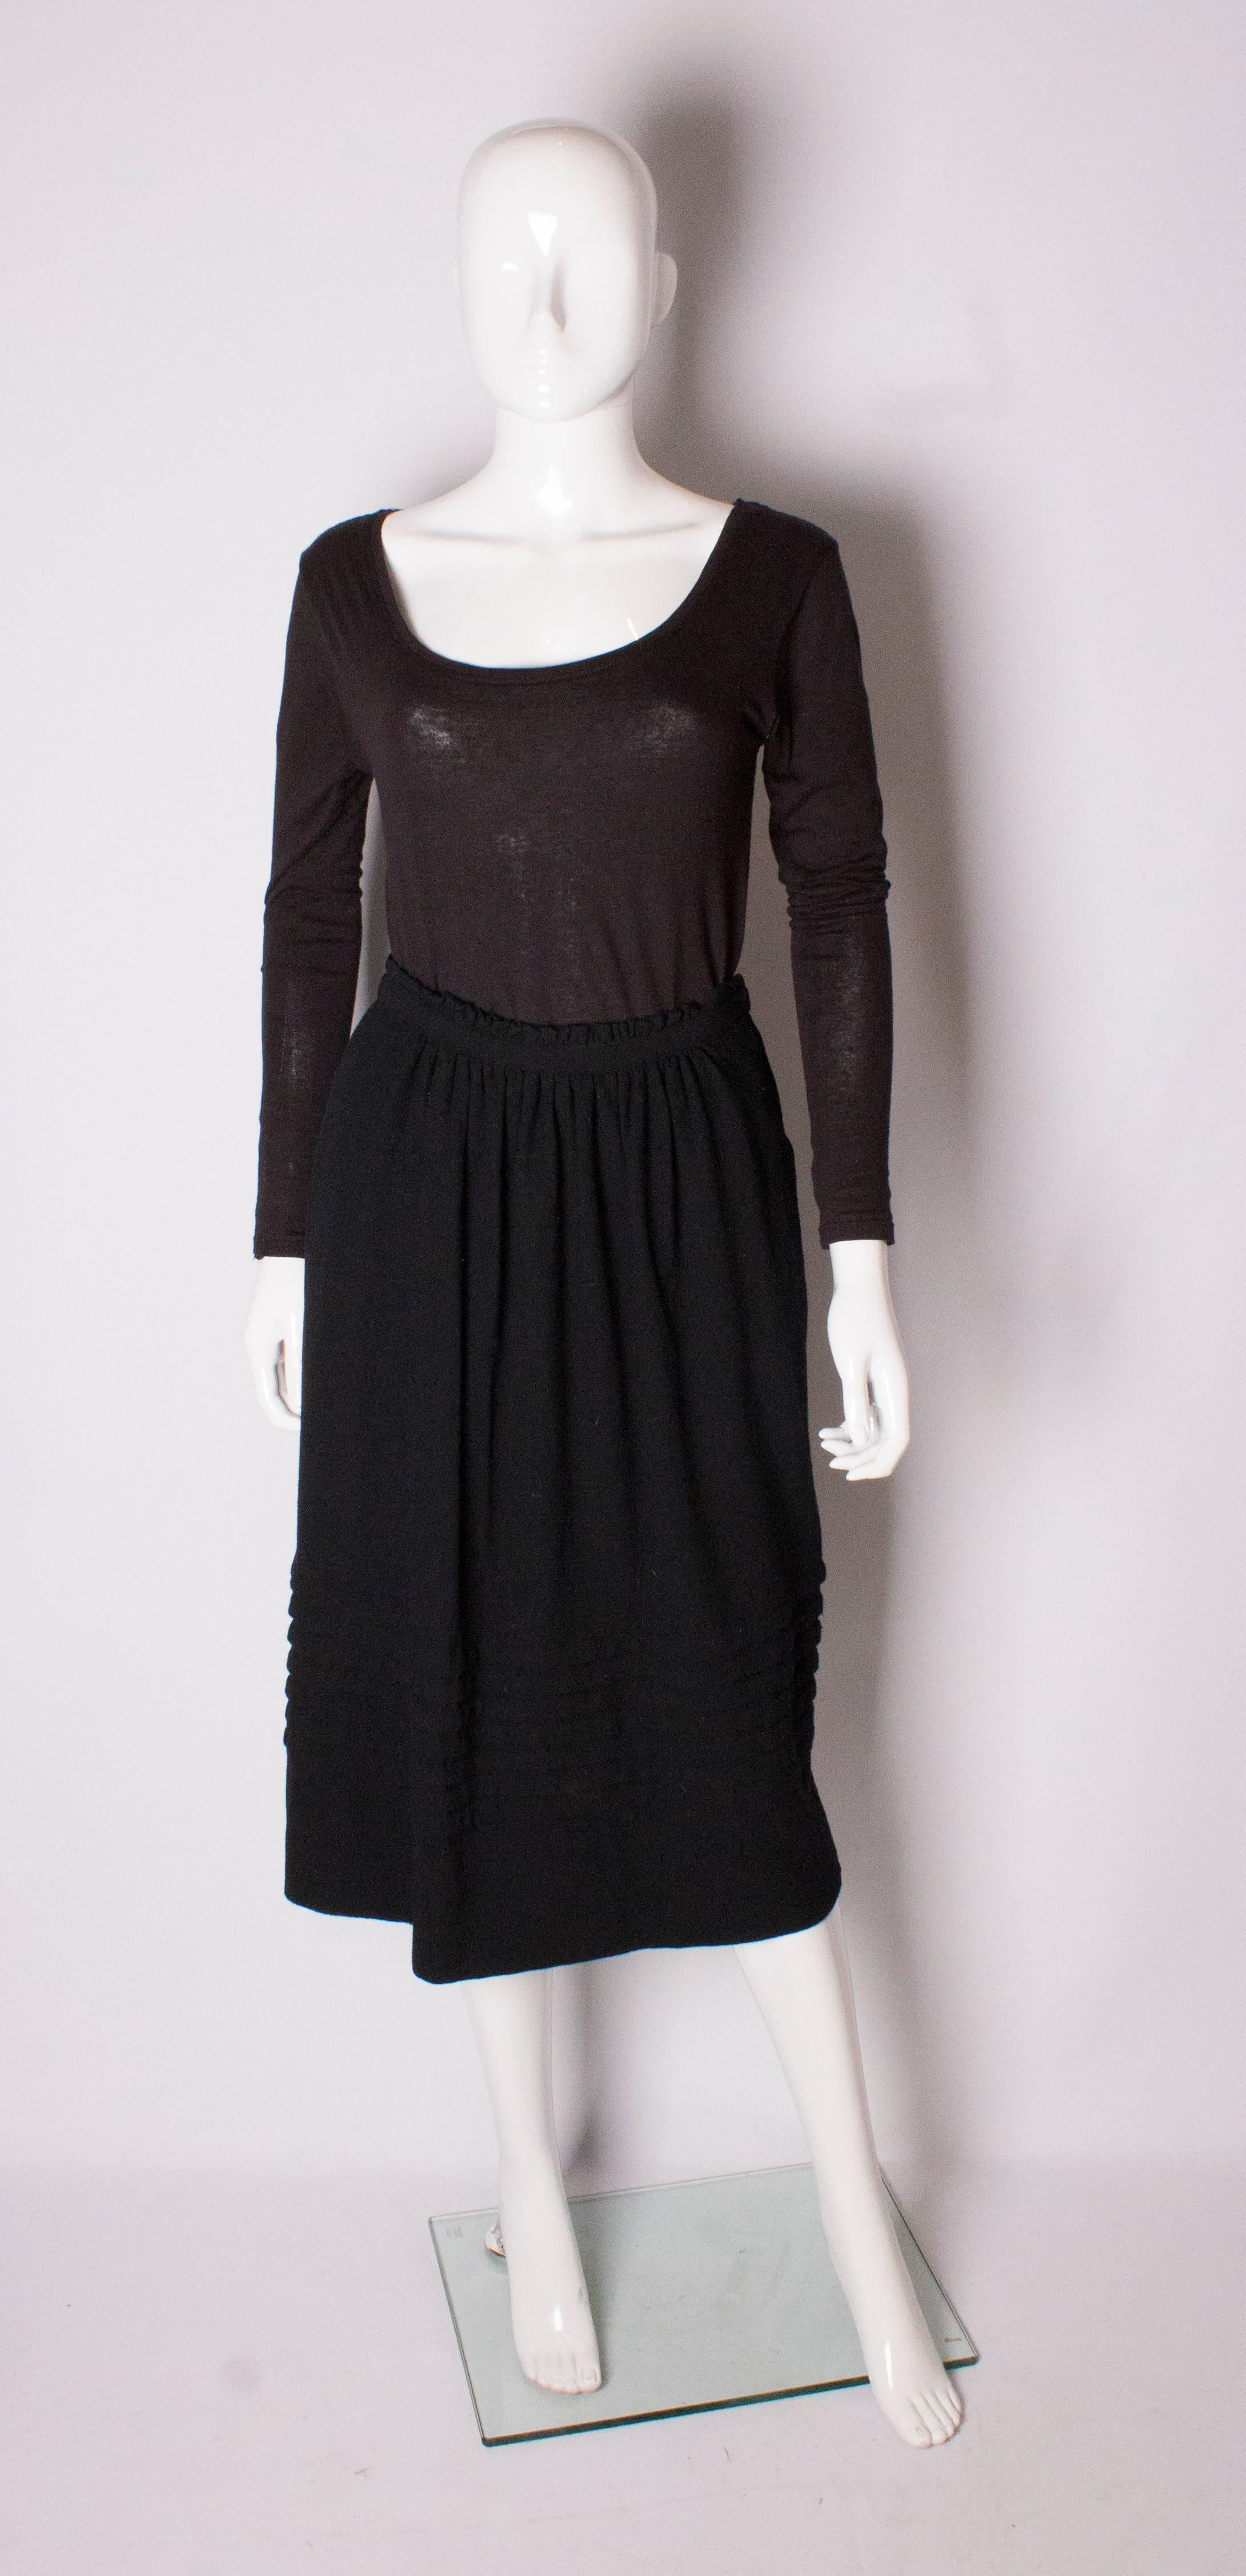 A chic and warm skirt by Christian Dior. The black wool skirt is fully lined, has gathering at the waist and rows of pleats near the hem. The skirt has a zip on the left hand side and pockets.